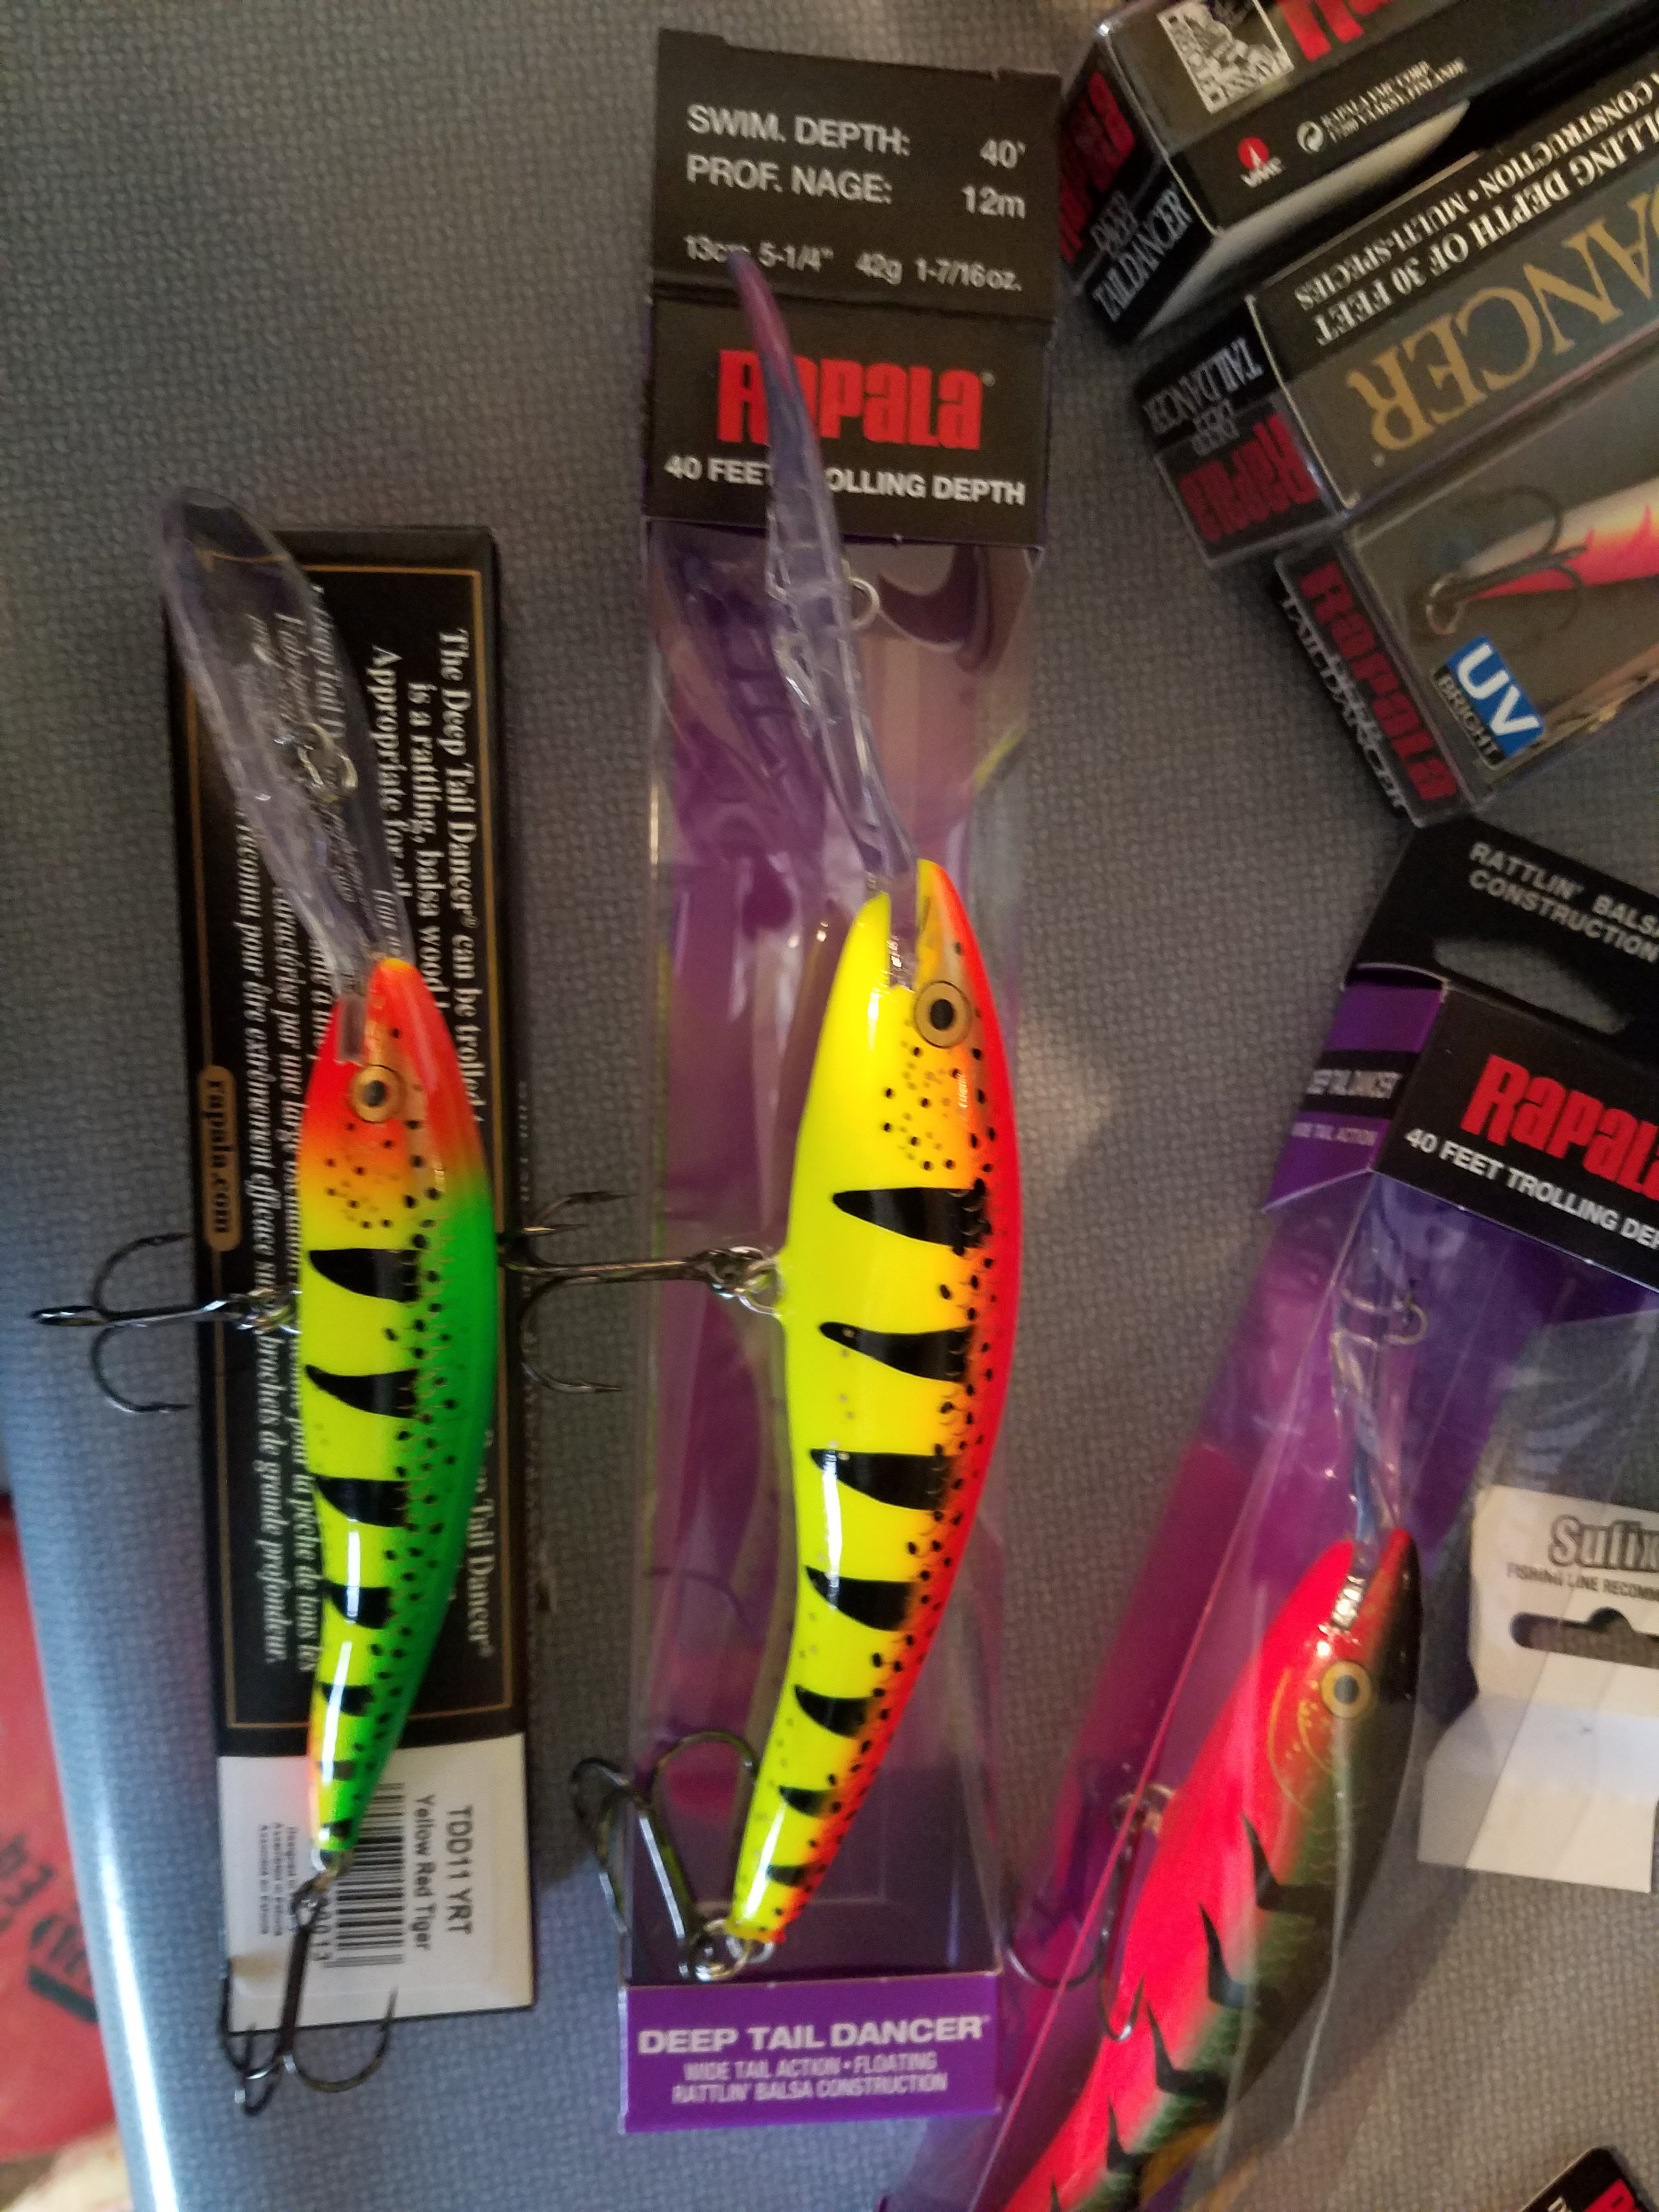 Rapala Deep Tail Dancer 13 - General Discussion Forum - General Discussion  Forum